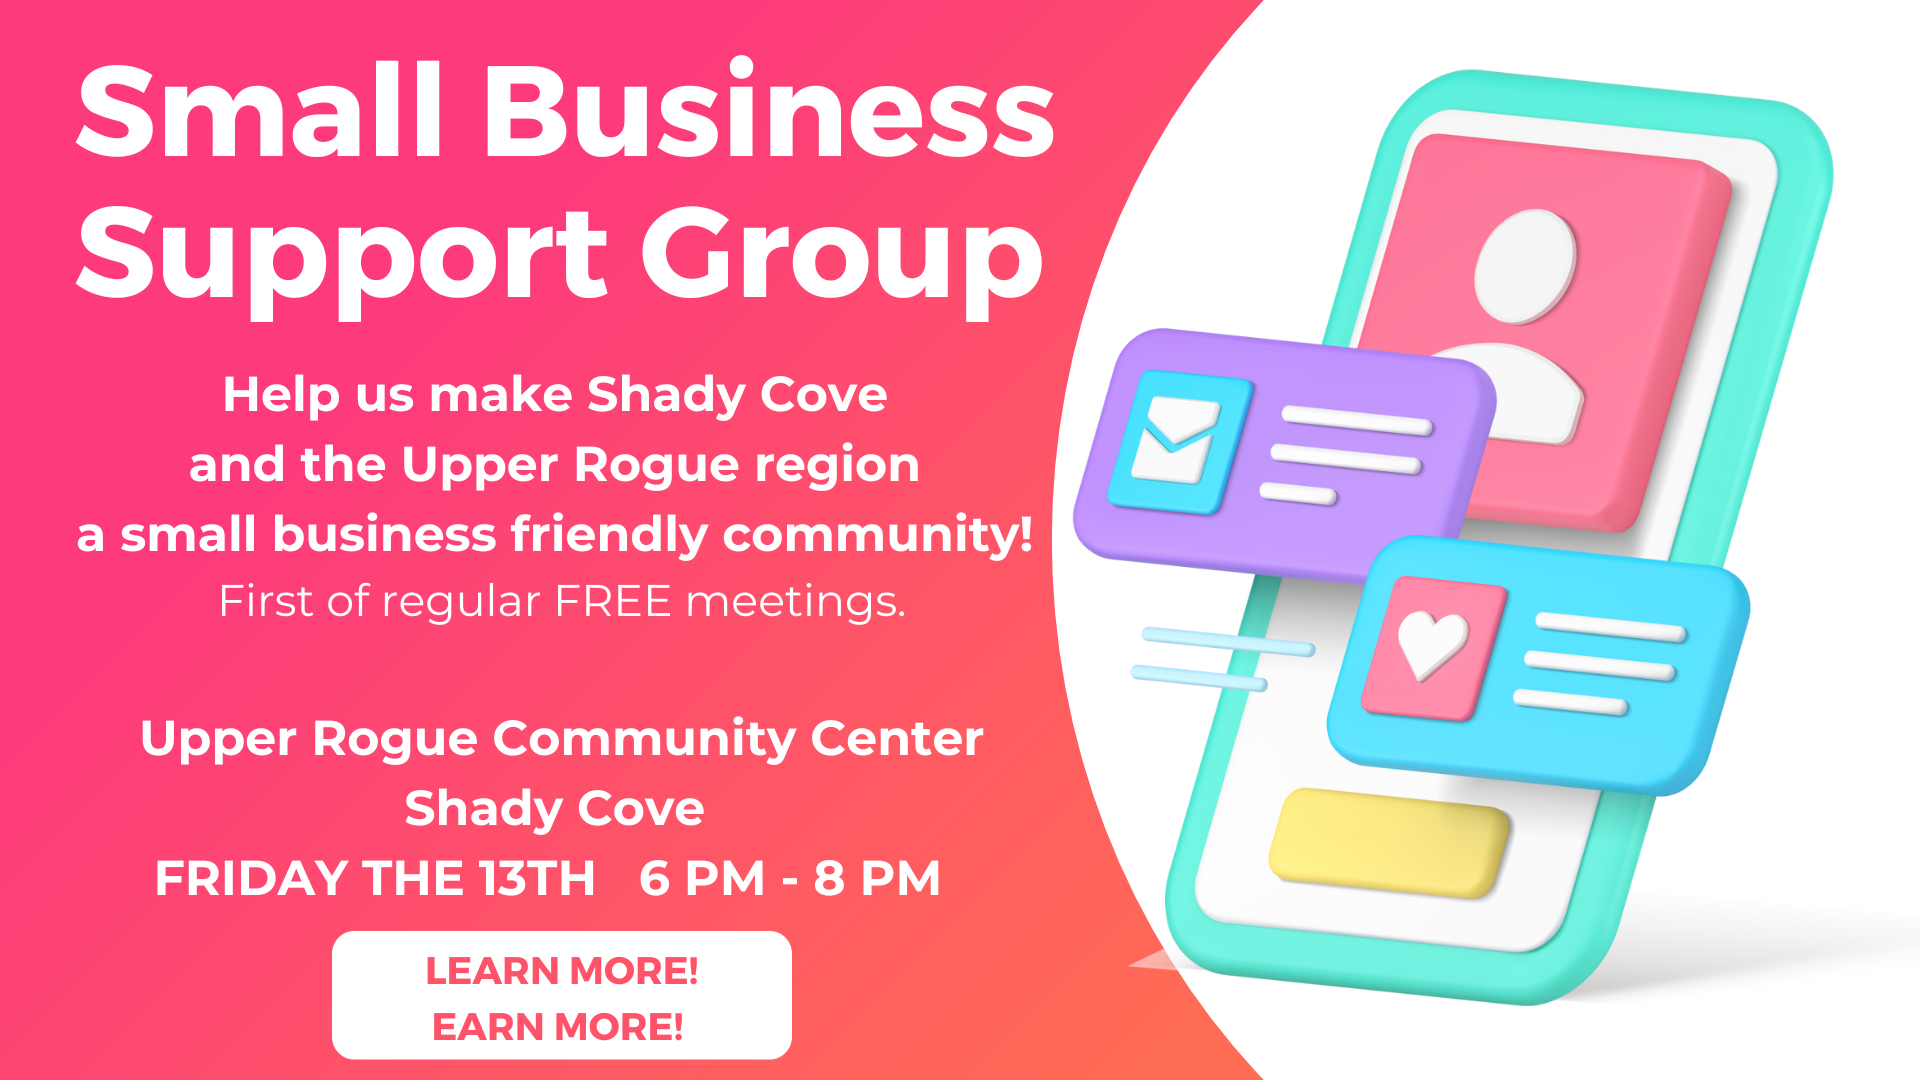 FREE Small Business Support Group (Upper Rogue Community Center)